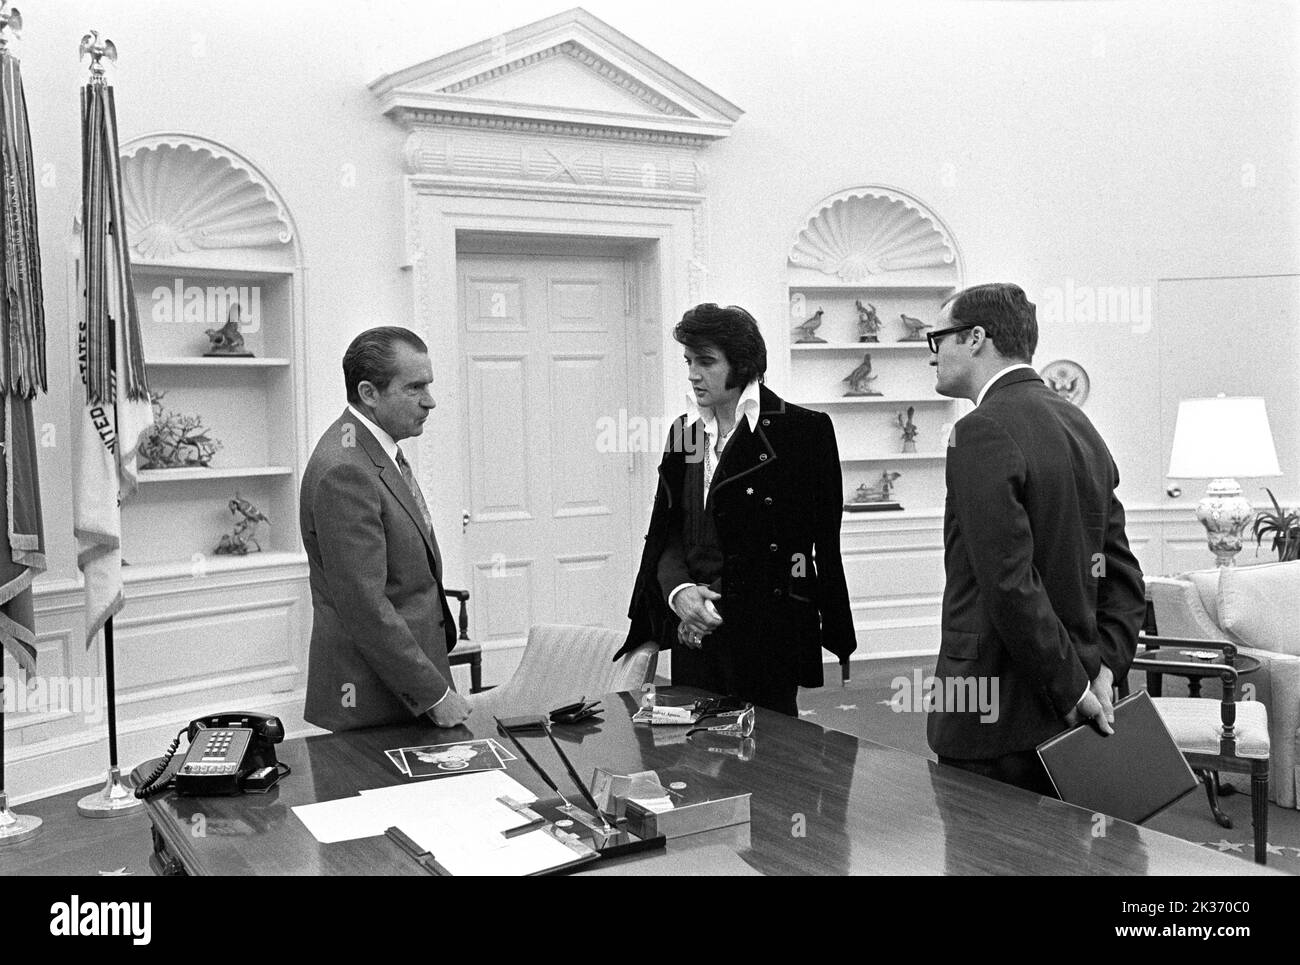 President Richard Nixon meeting Elvis Presley in the White House Oval Office. Assistant Egil Krogh stands nearby. Stock Photo